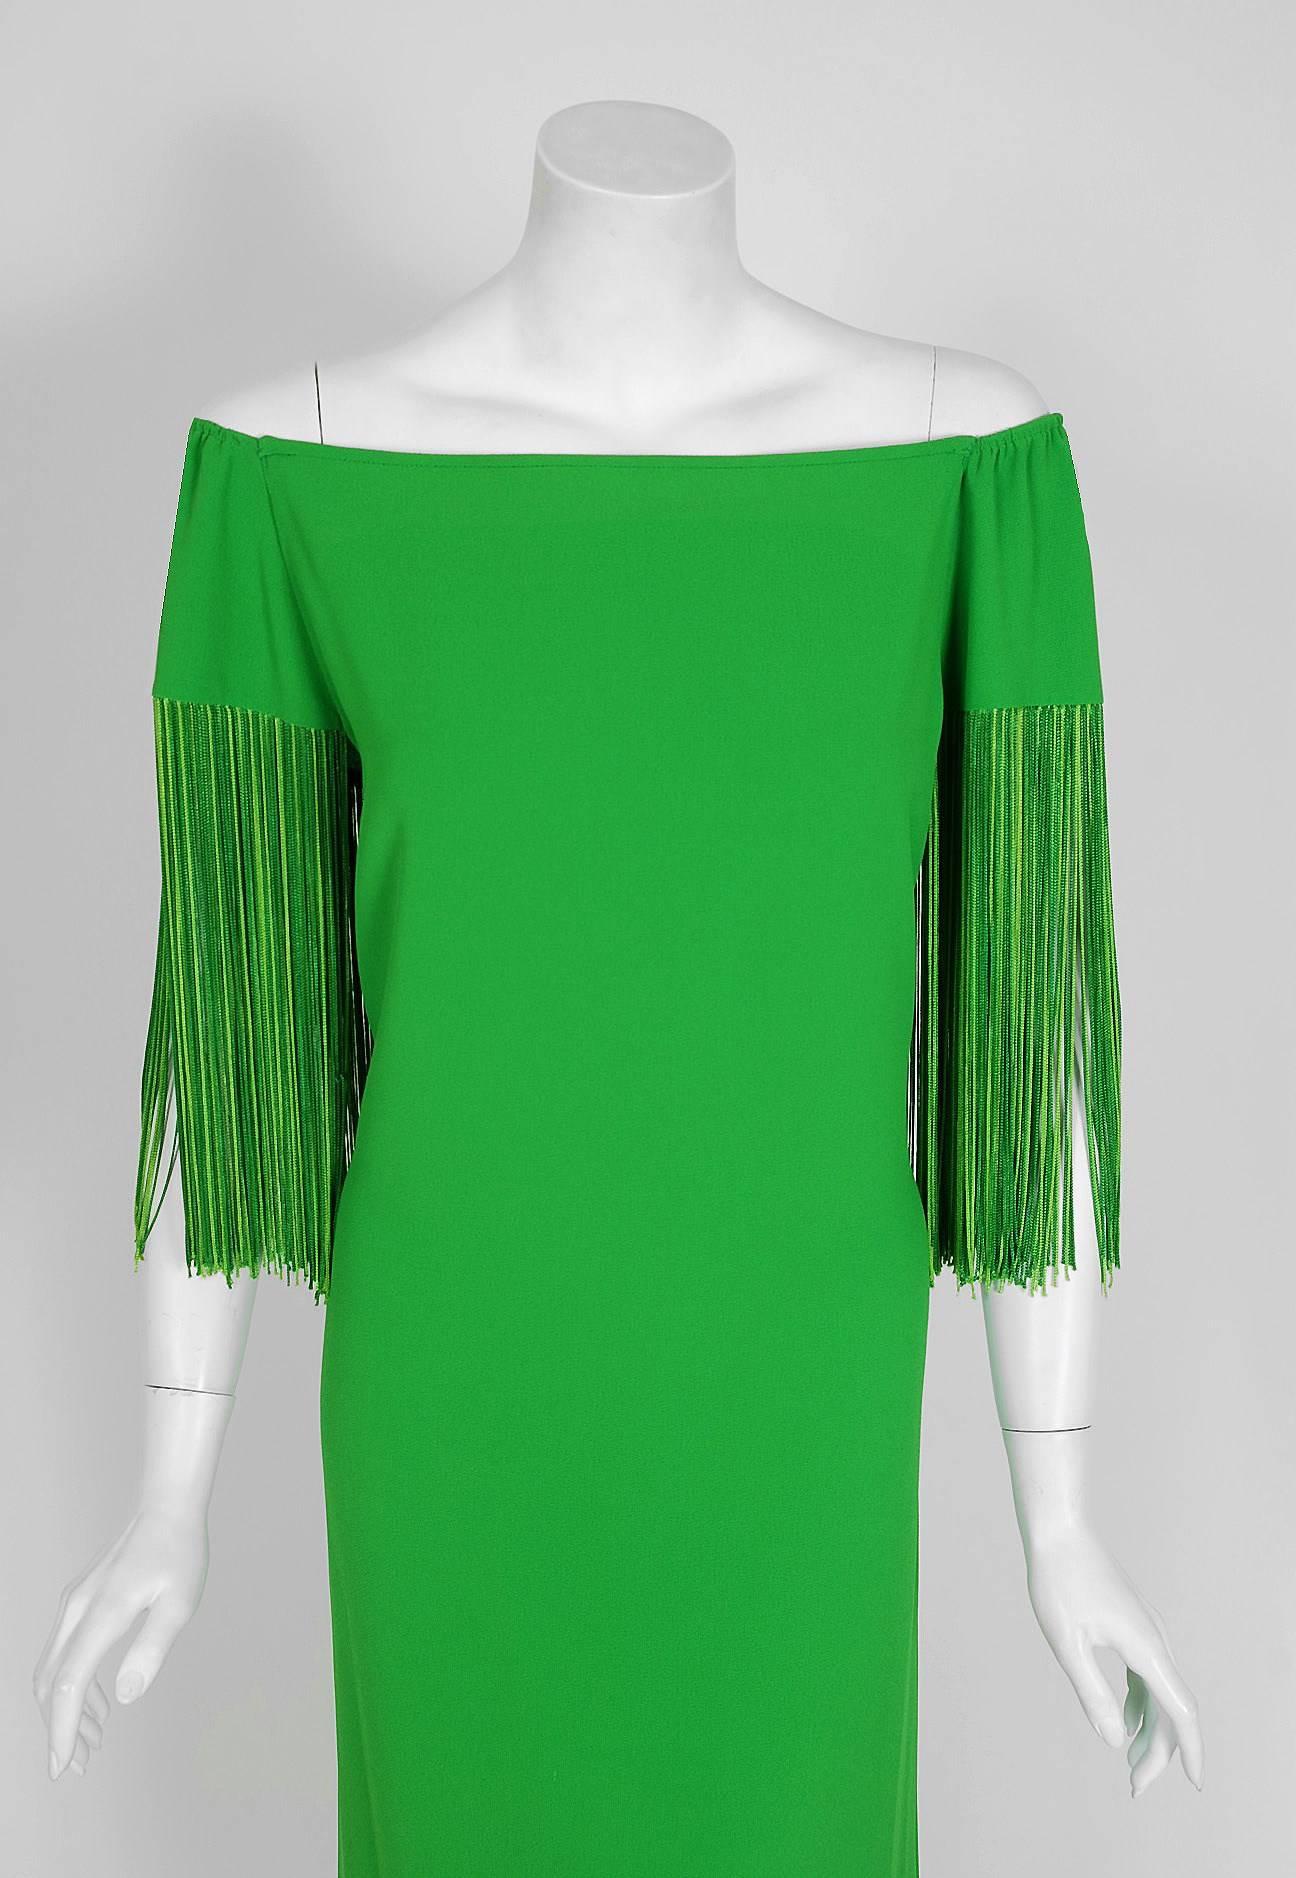 Exquisite 1970's kelly-green crepe dress by the famous 